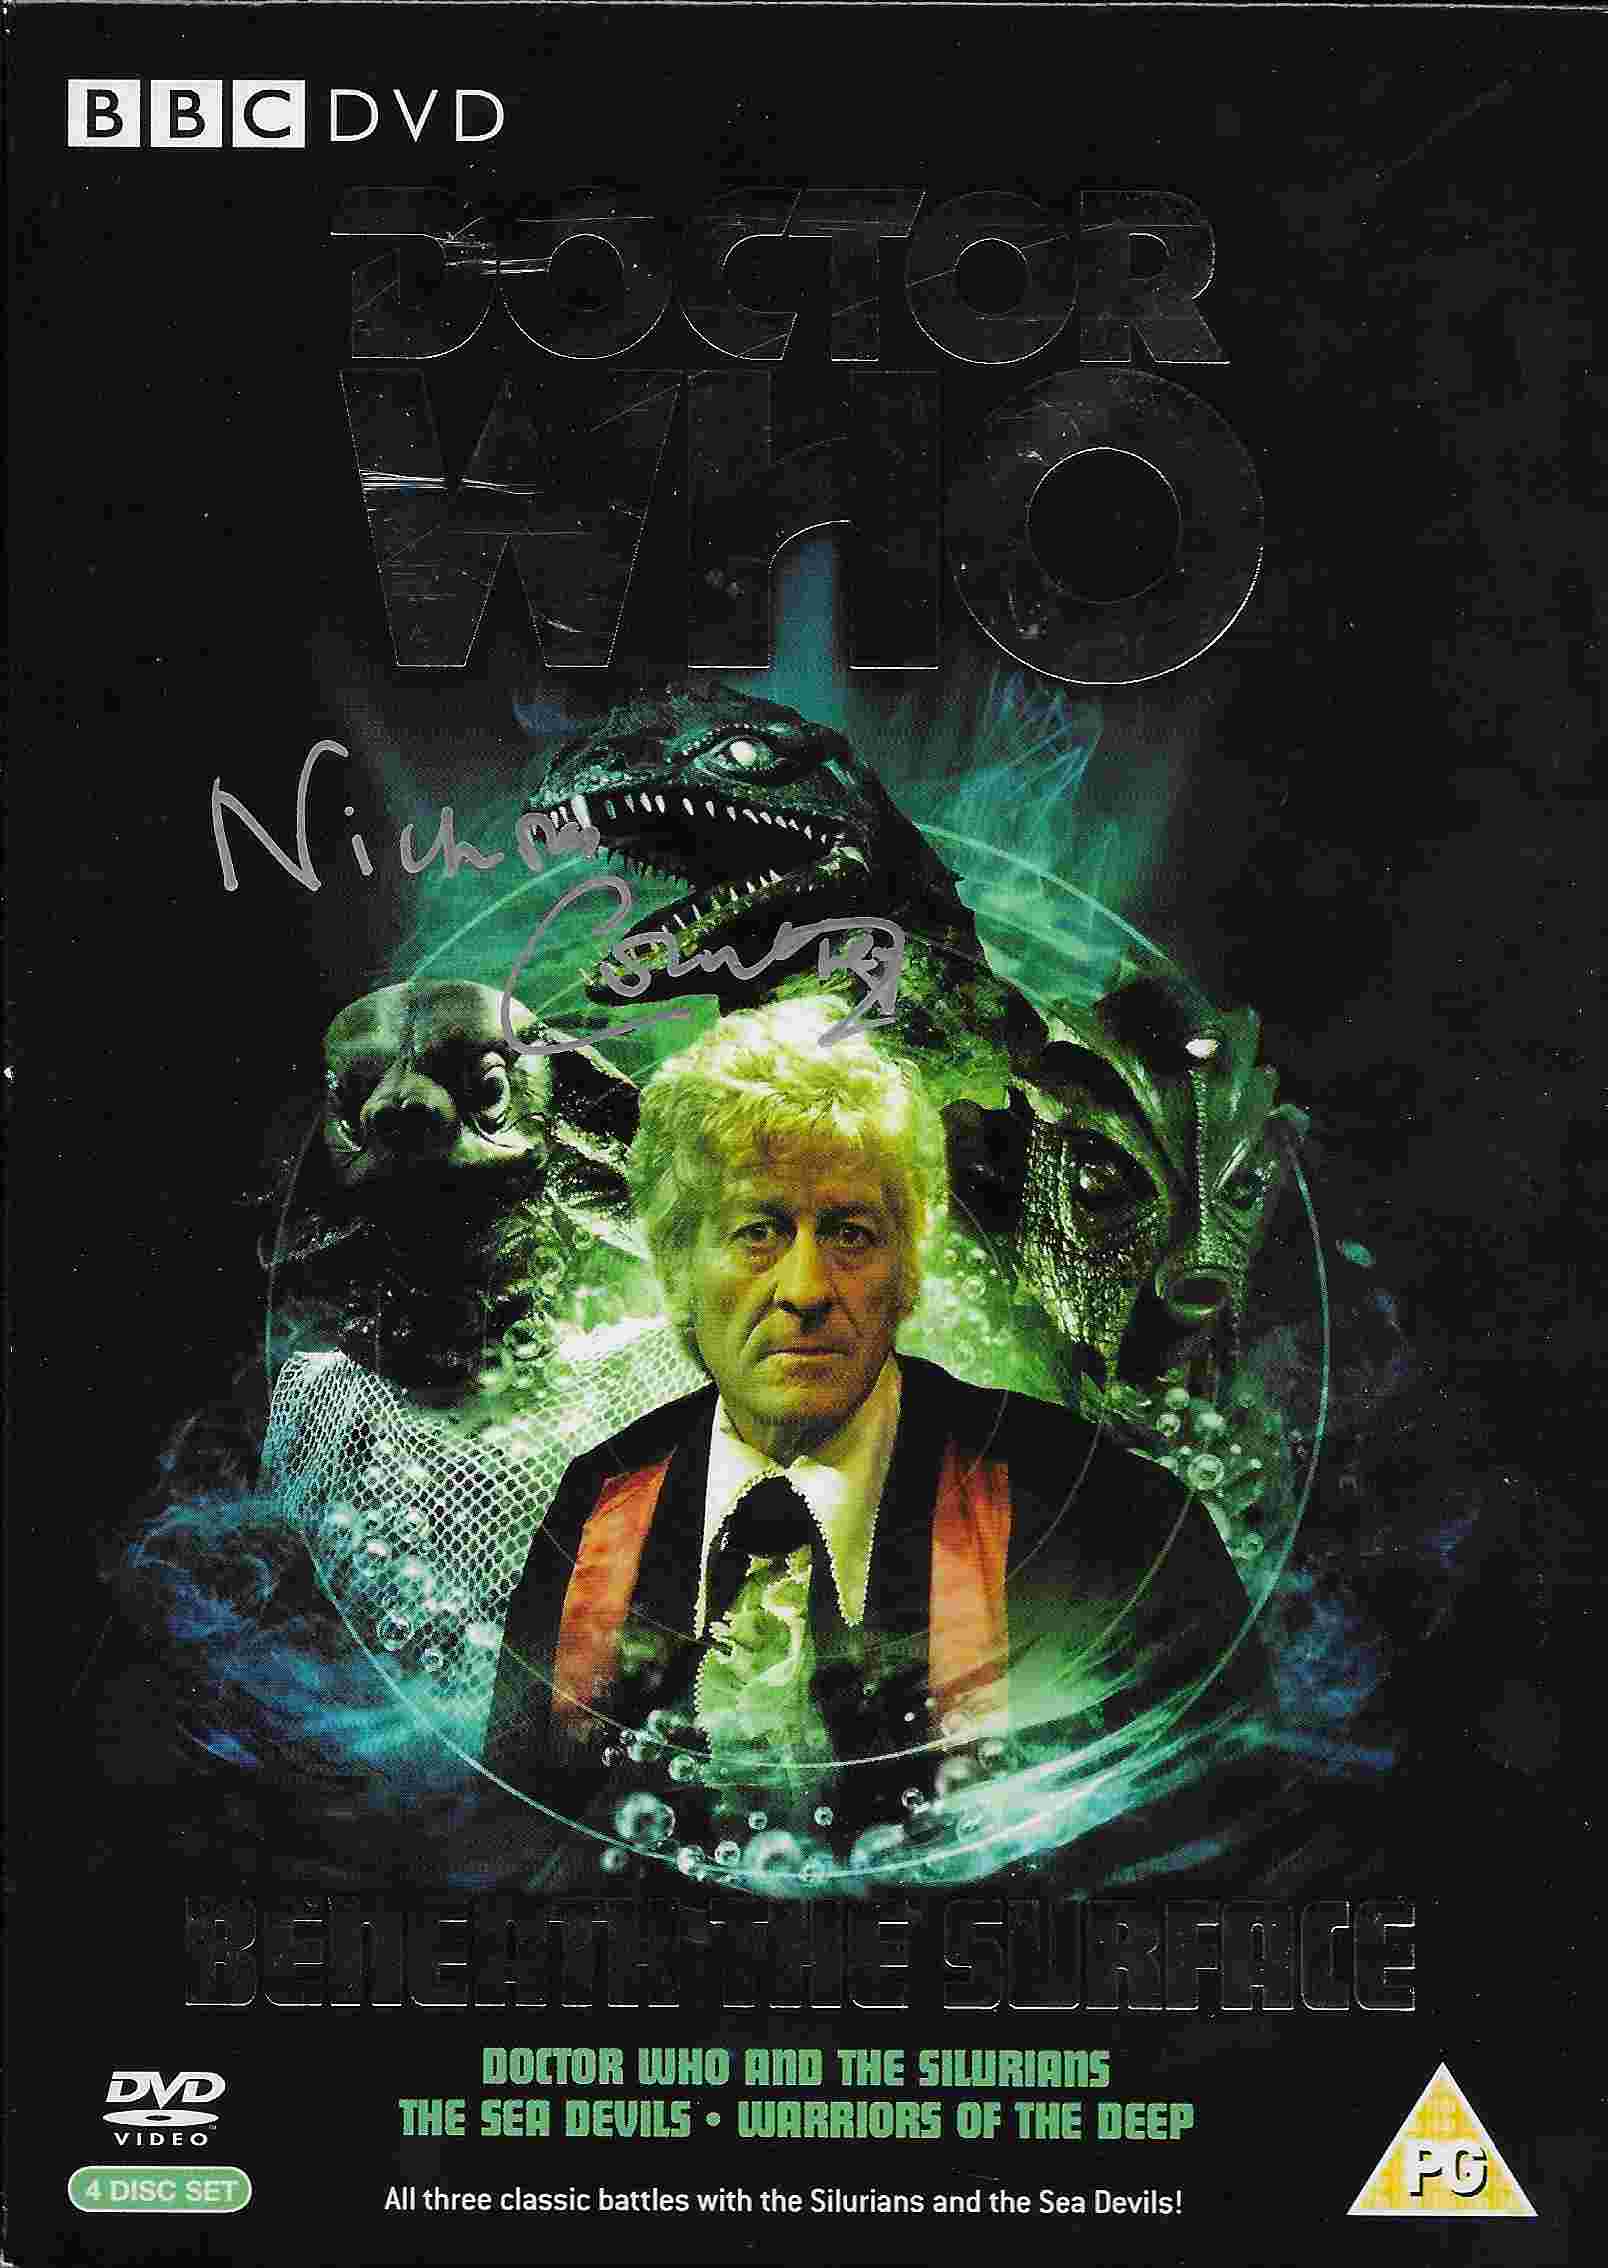 Picture of BBCDVD 2438 Doctor Who - Beneath the surface (Autographed by Nicholas Courtney) by artist Malcolm Hulke / Johnny Byrne from the BBC dvds - Records and Tapes library